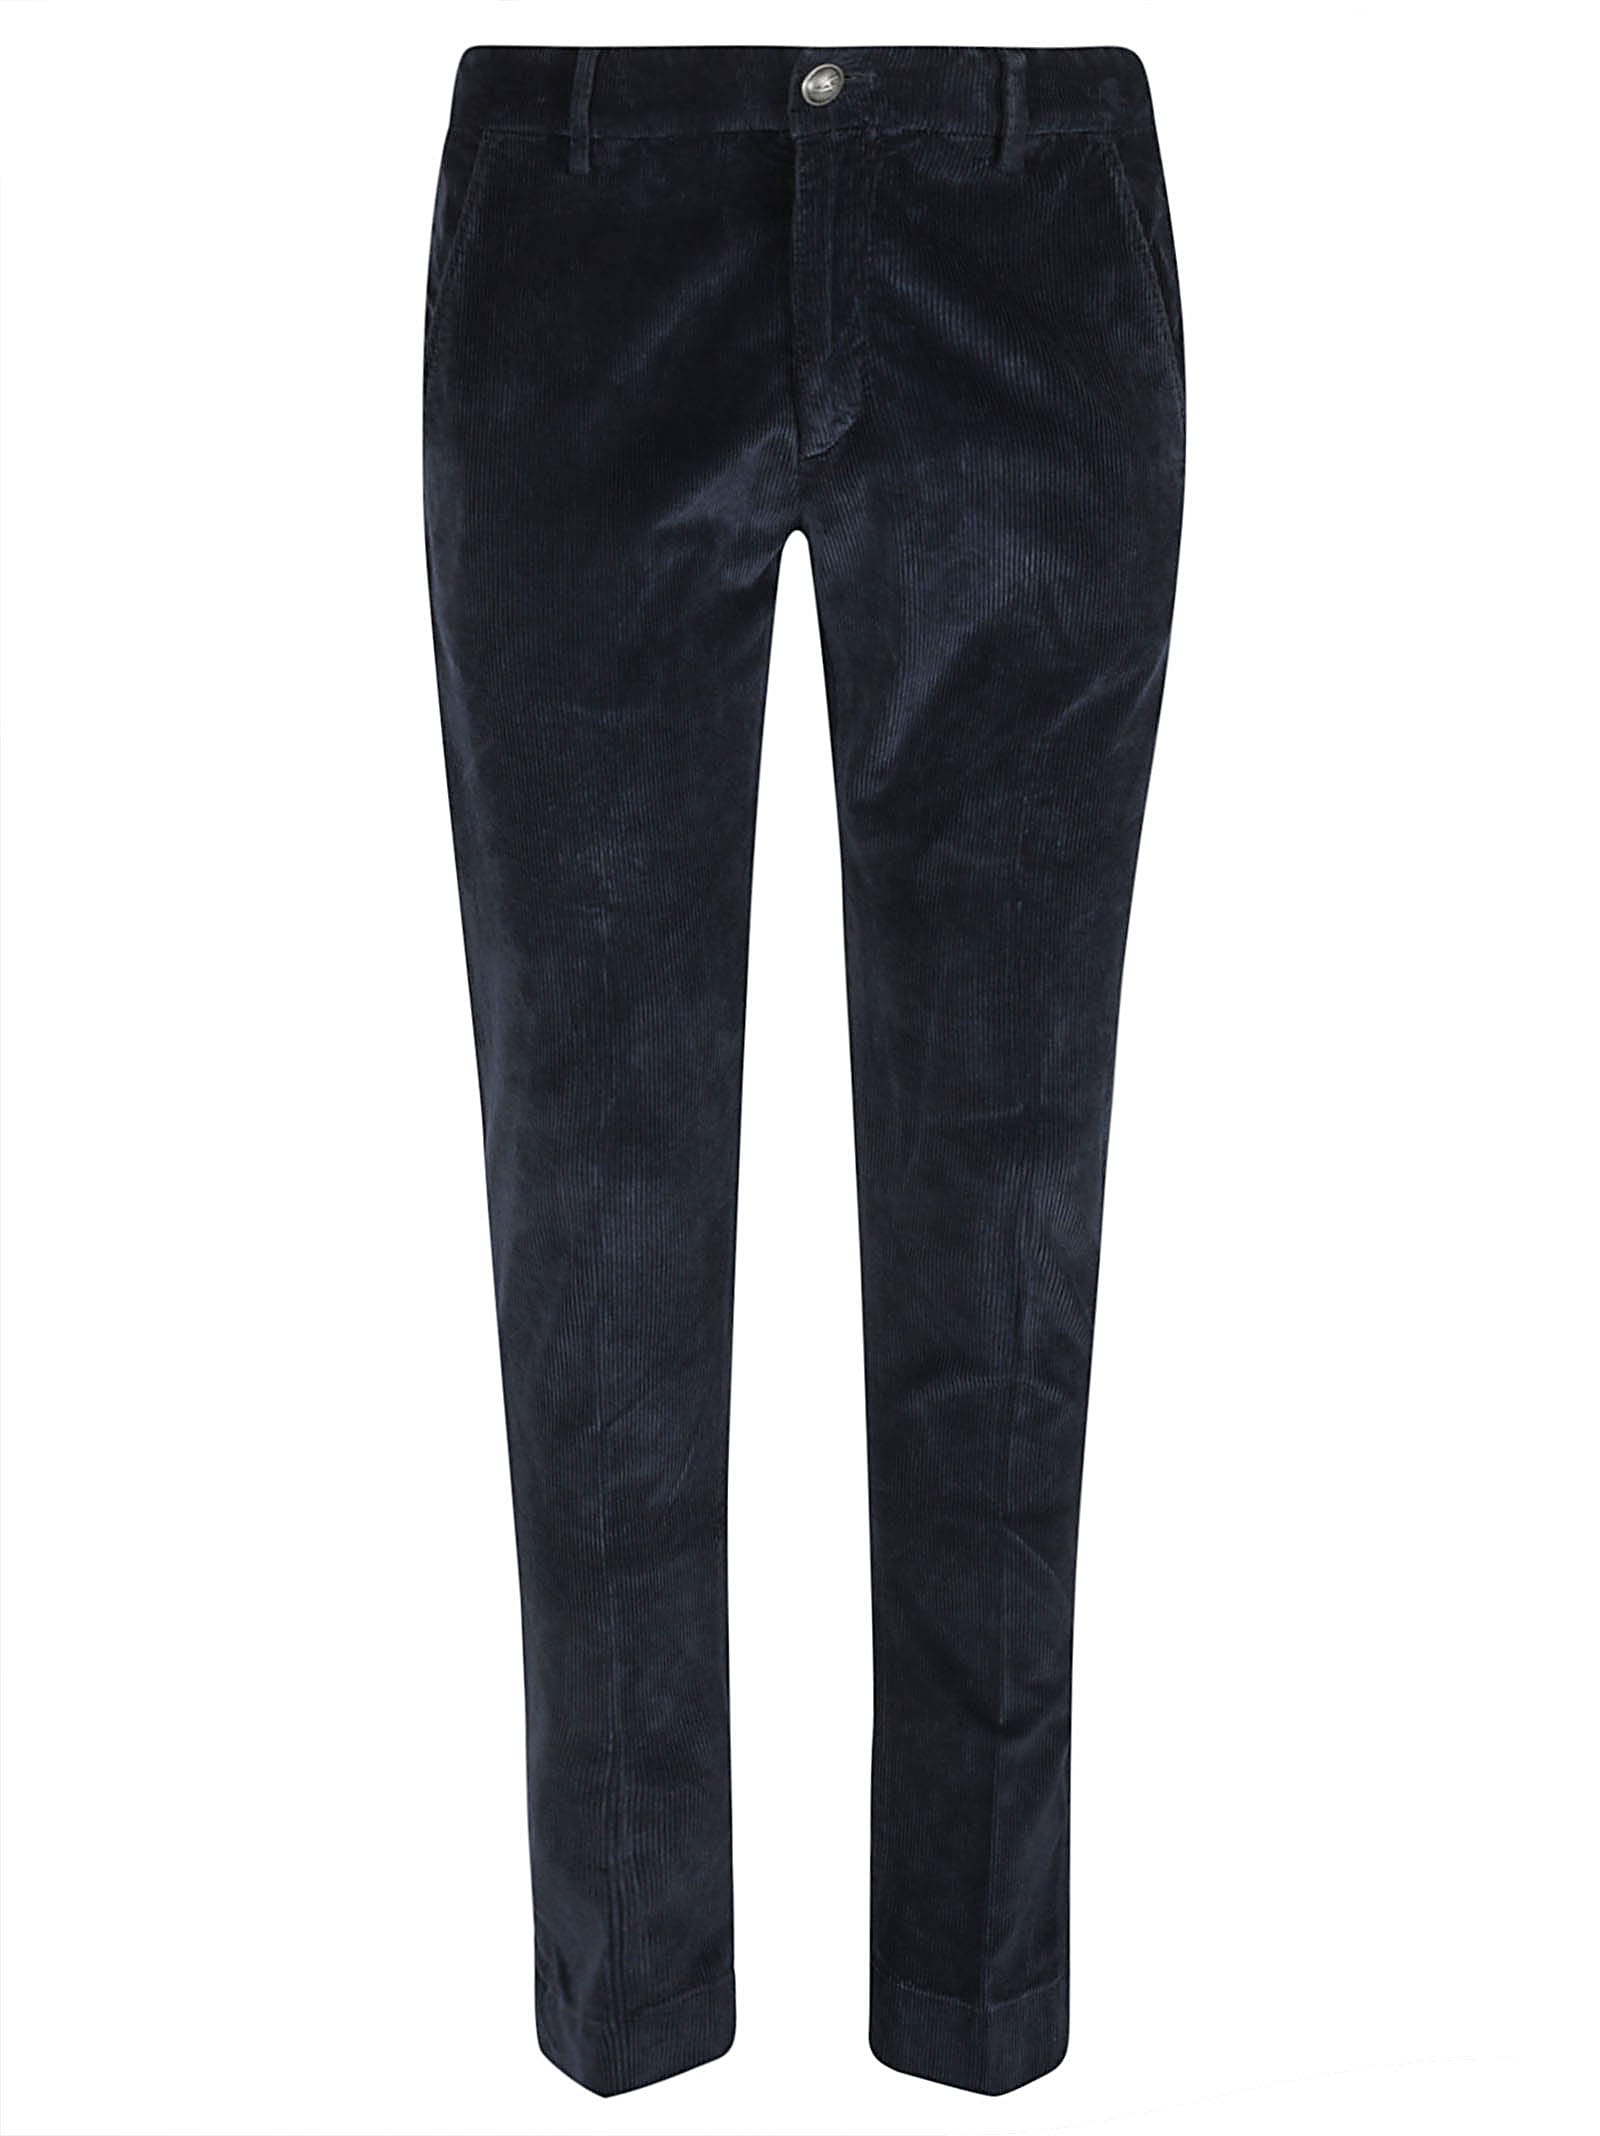 HAND PICKED BUTTONED FITTED TROUSERS